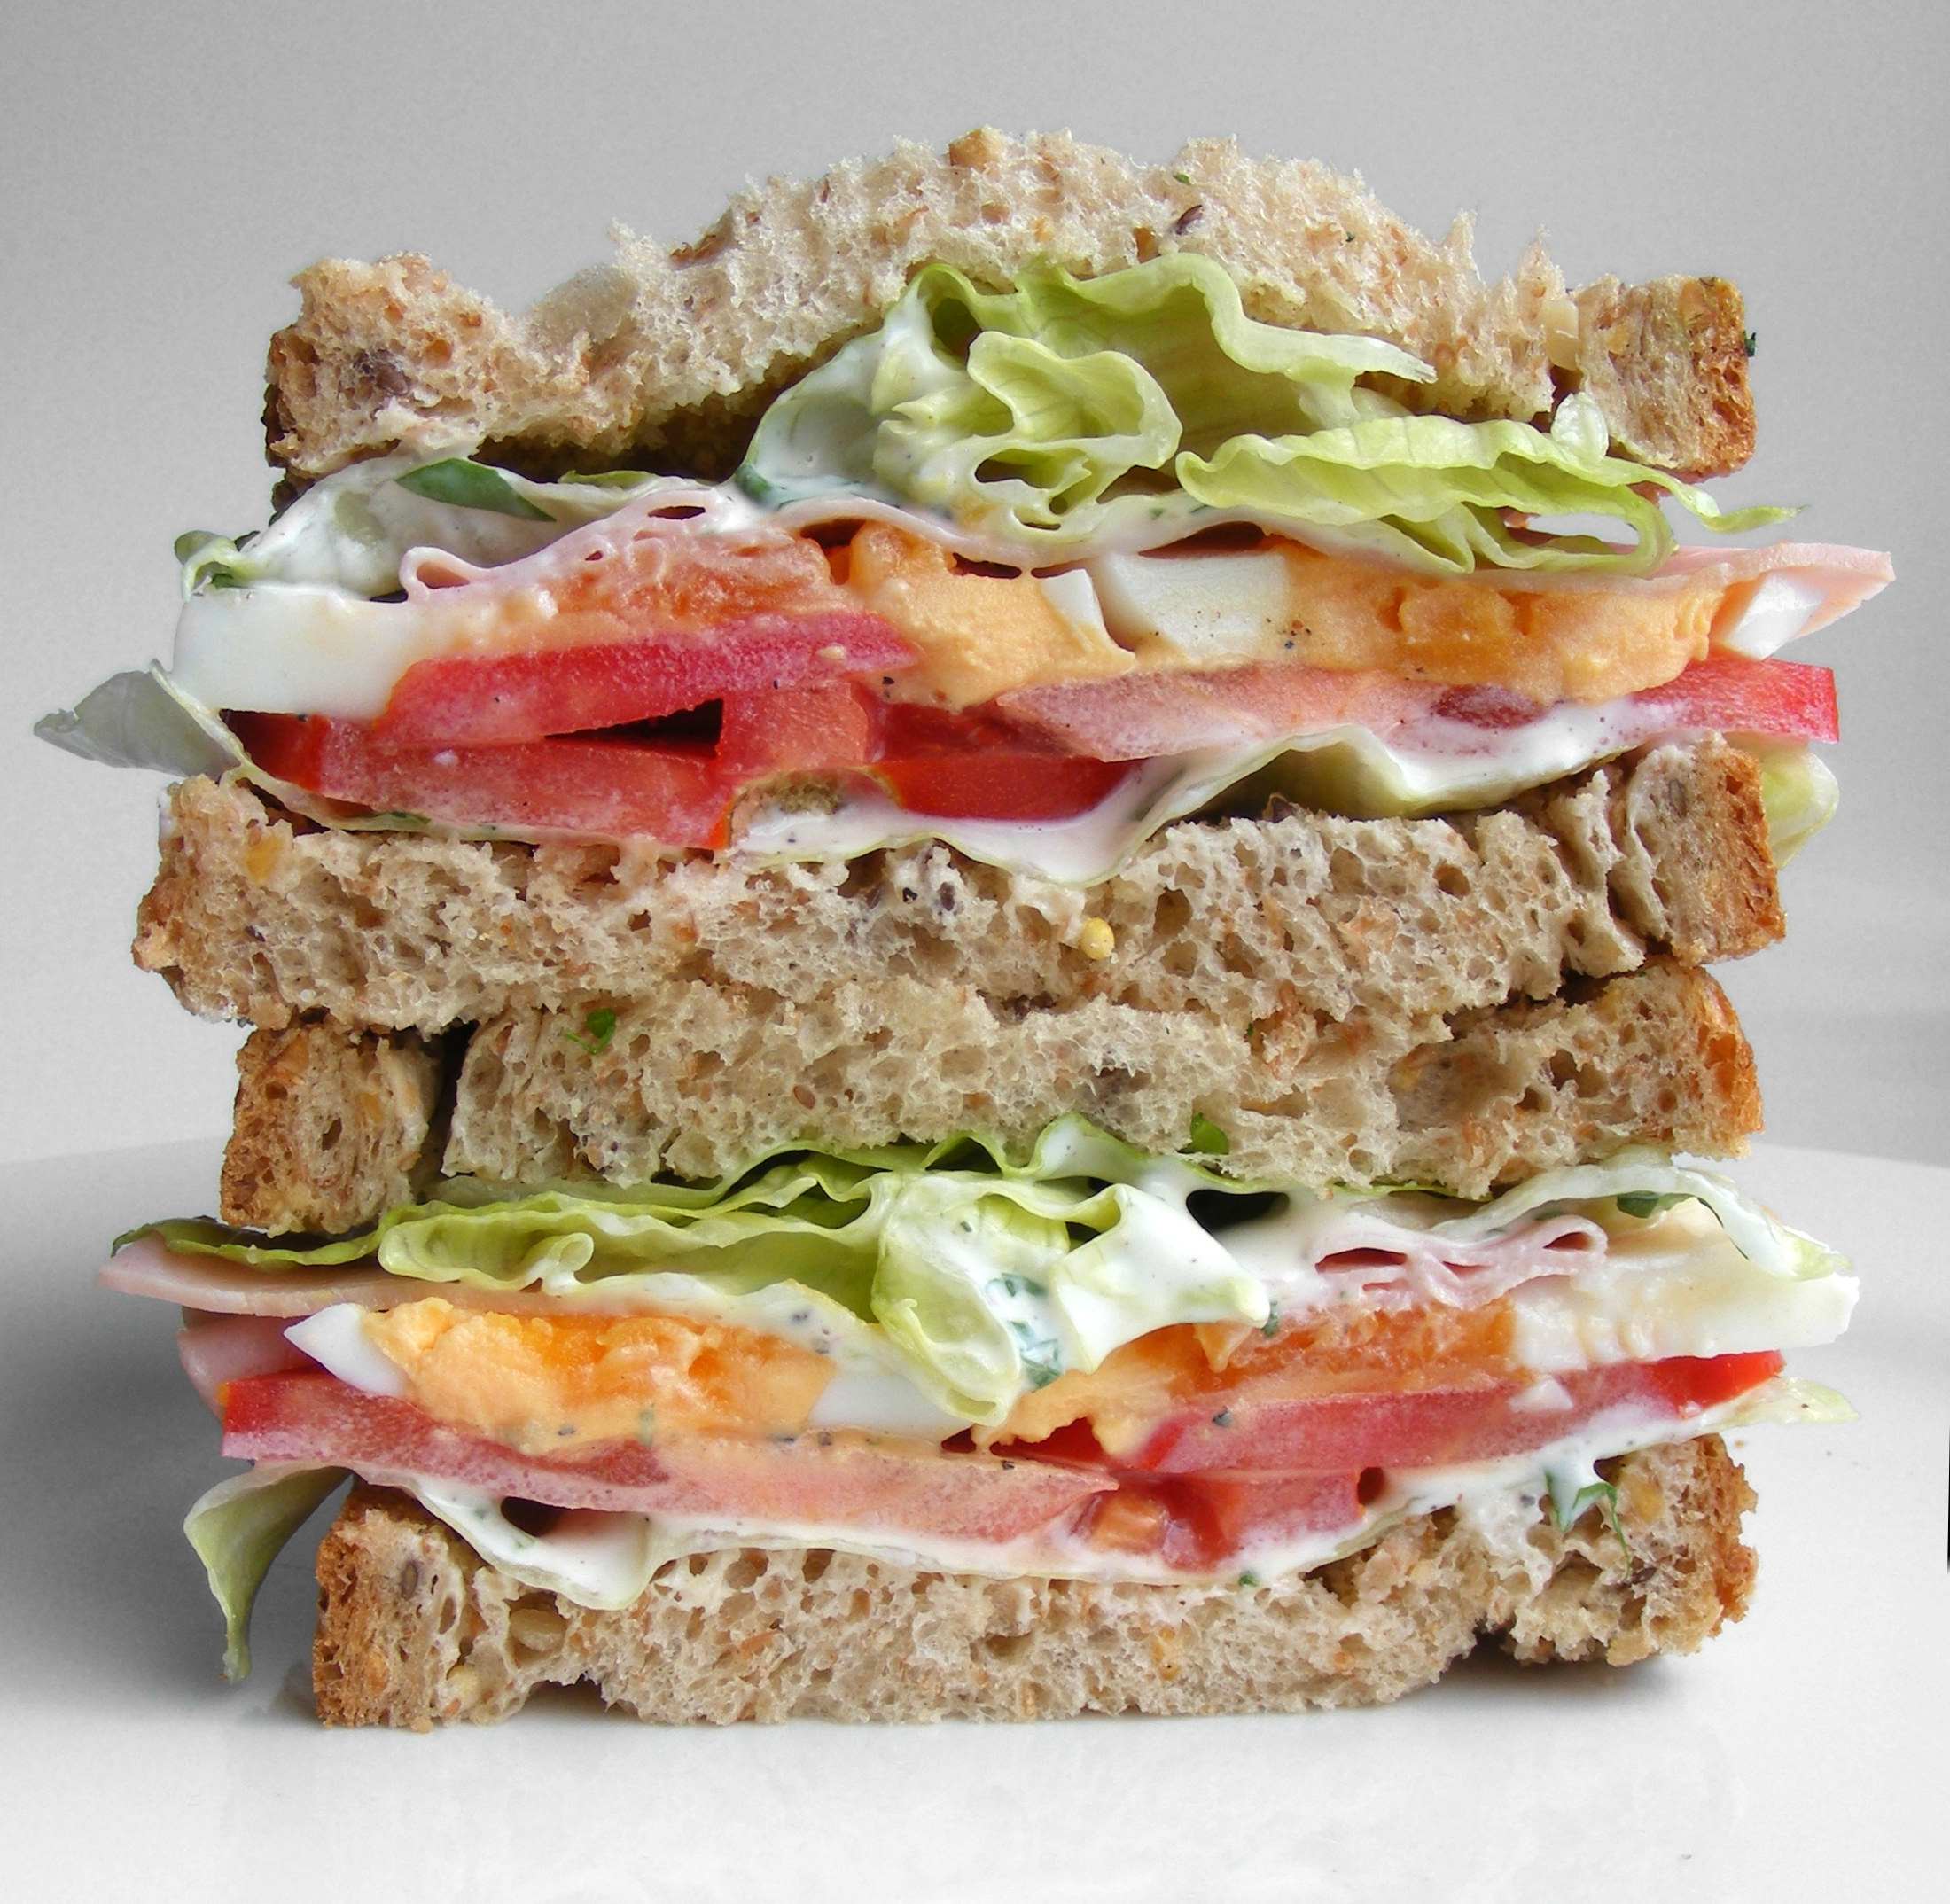 A lettuce and tomato sandwich with mayonnaise.